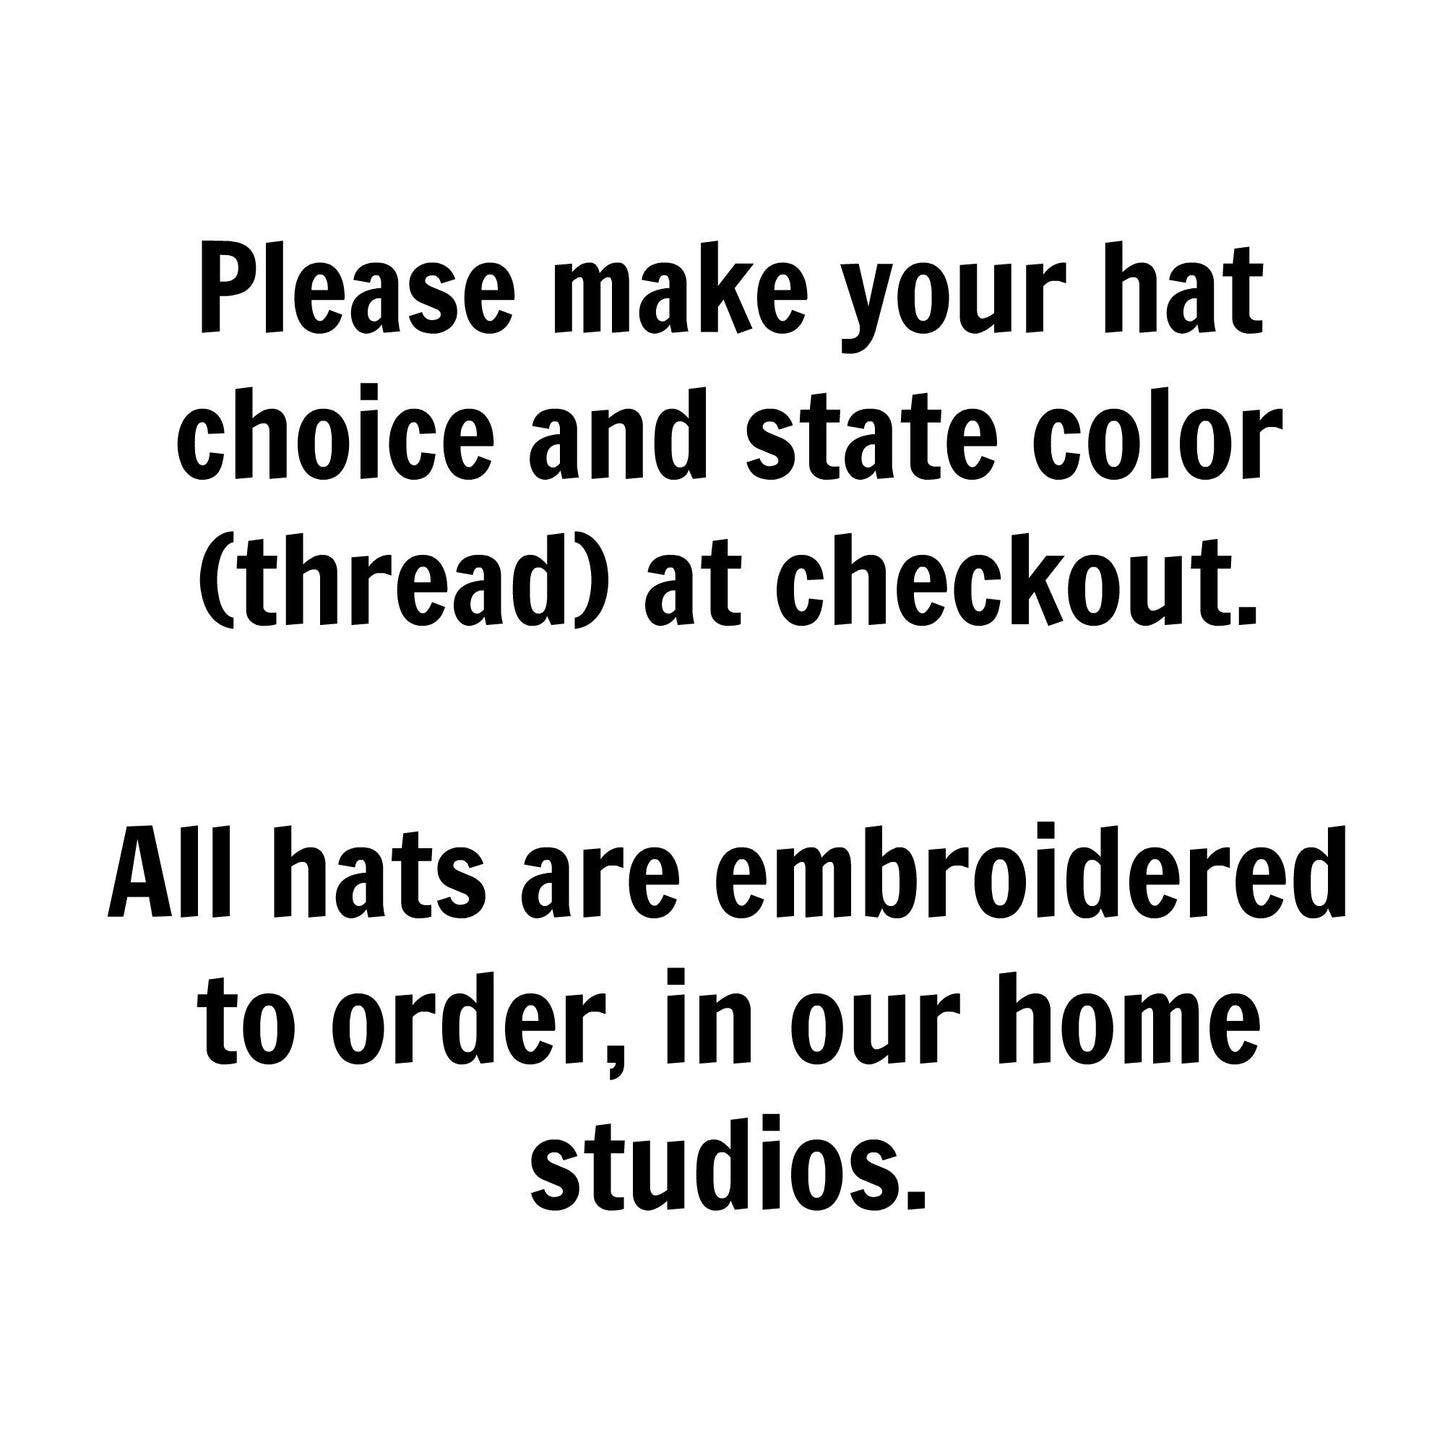 Idaho Hat - Distressed Snapback Trucker Hat - Idaho State Outline - Many Colors Available